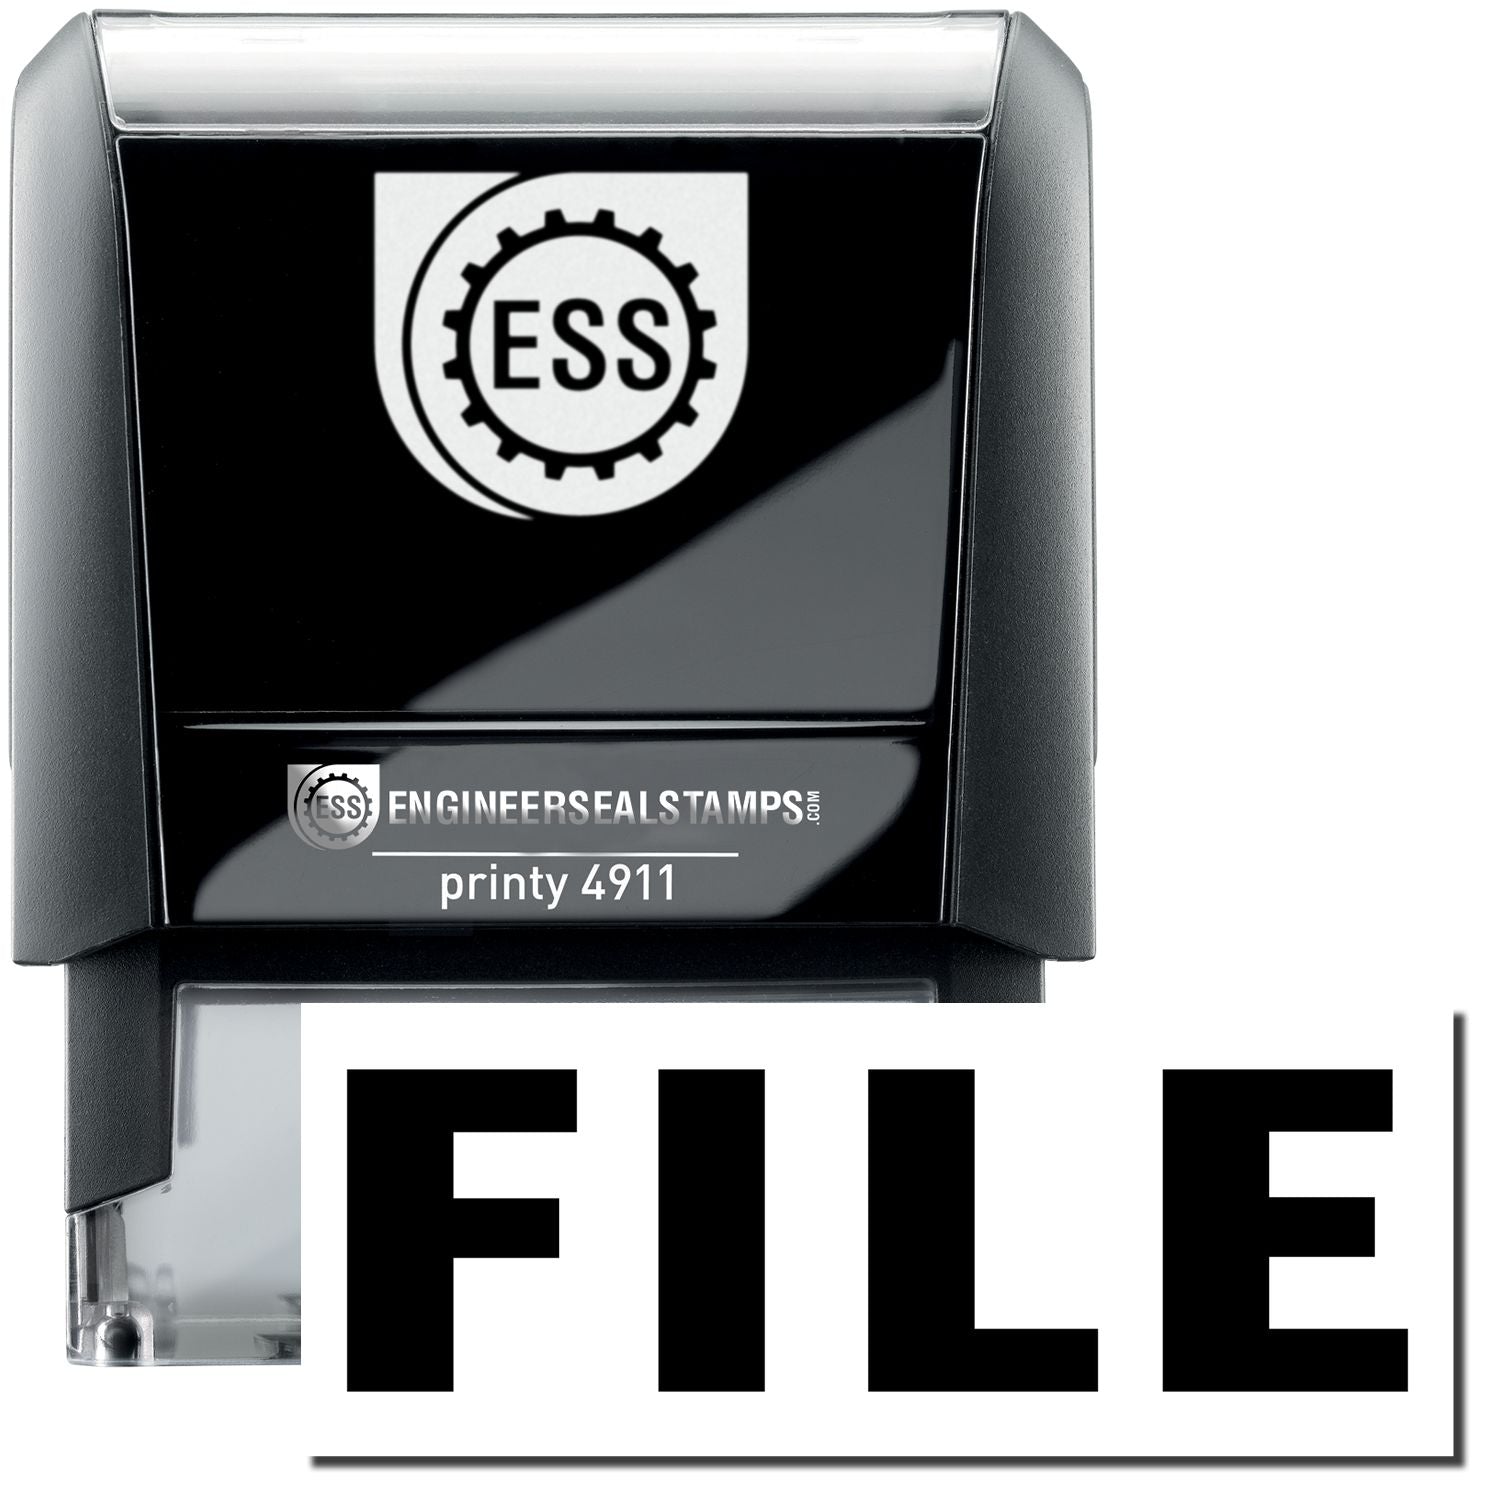 A self-inking stamp with a stamped image showing how the text "FILE" is displayed after stamping.